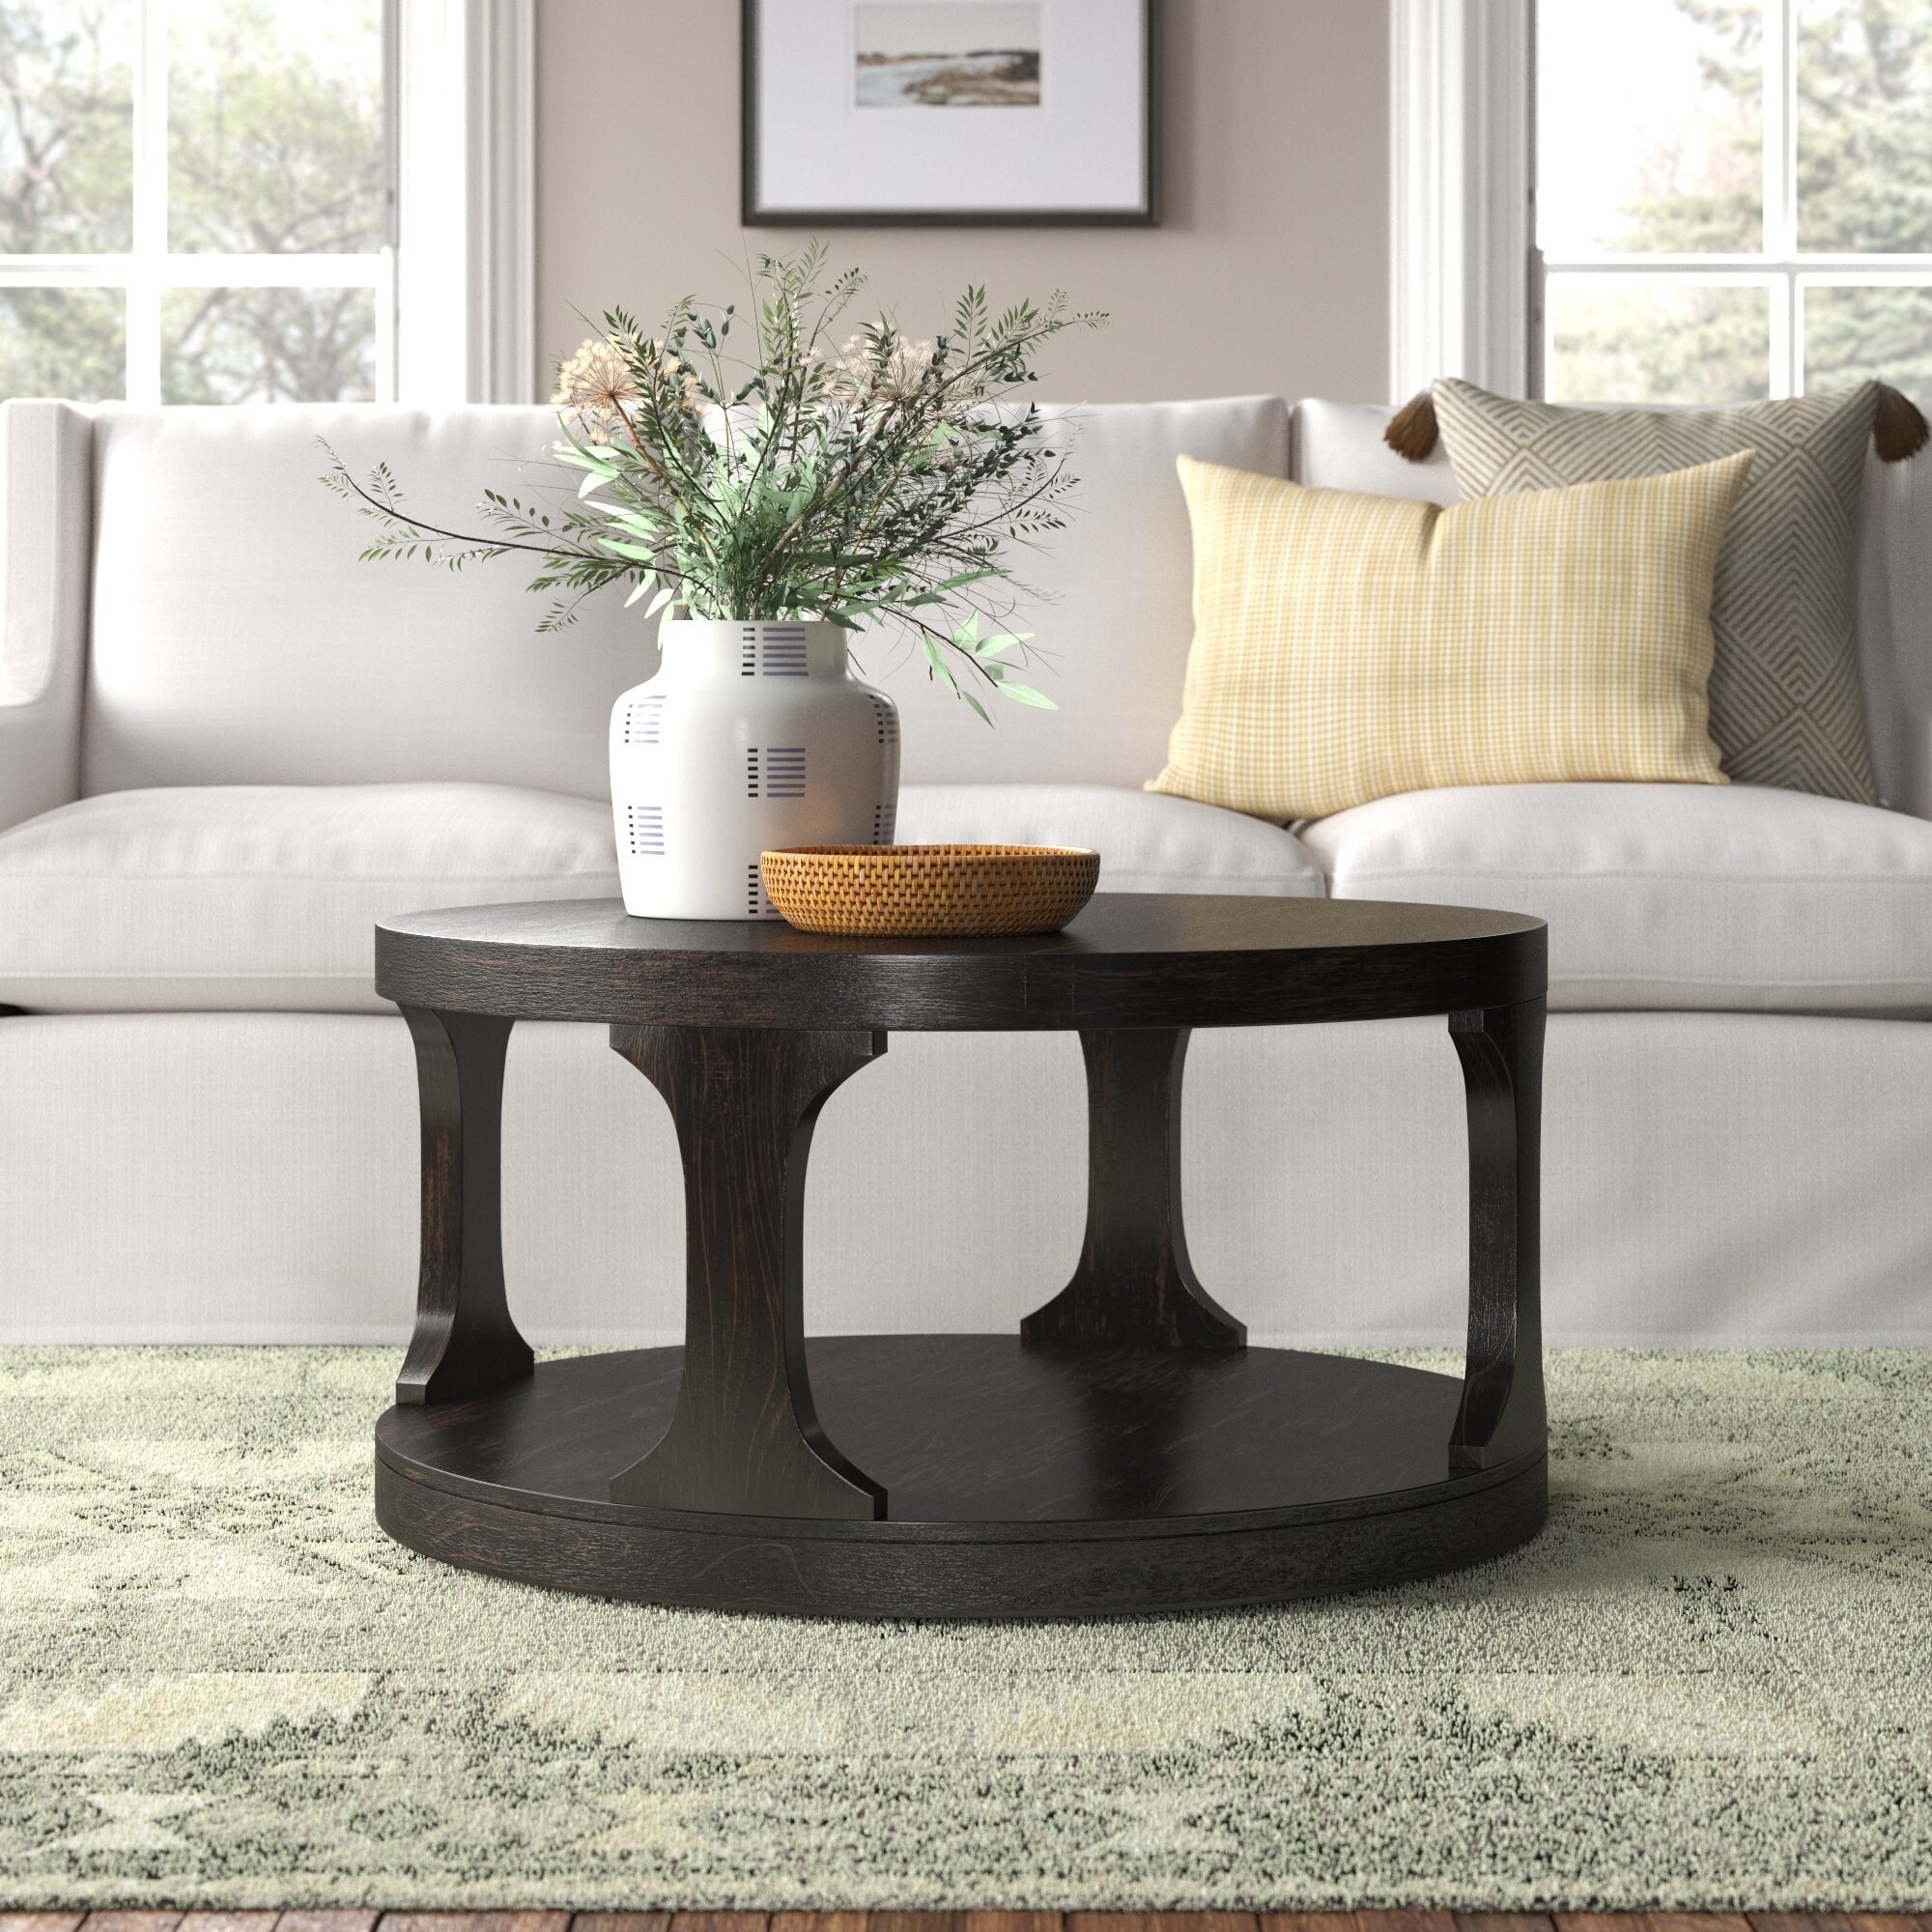 Image of the dark brown coffee table